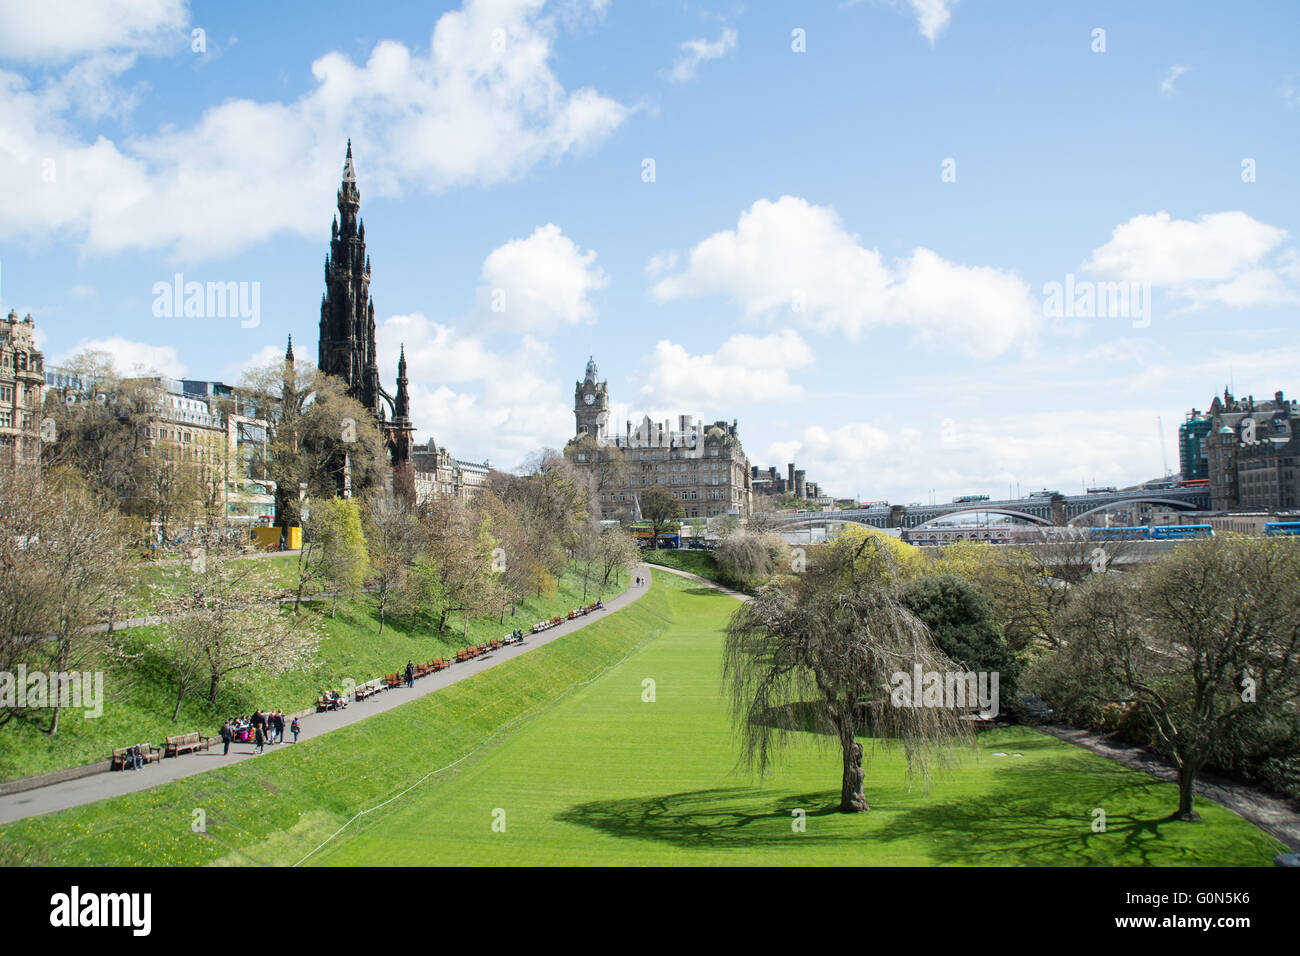 A view on Princes Street gardens with Edinburgh skyline in the background on a sunny spring day Stock Photo